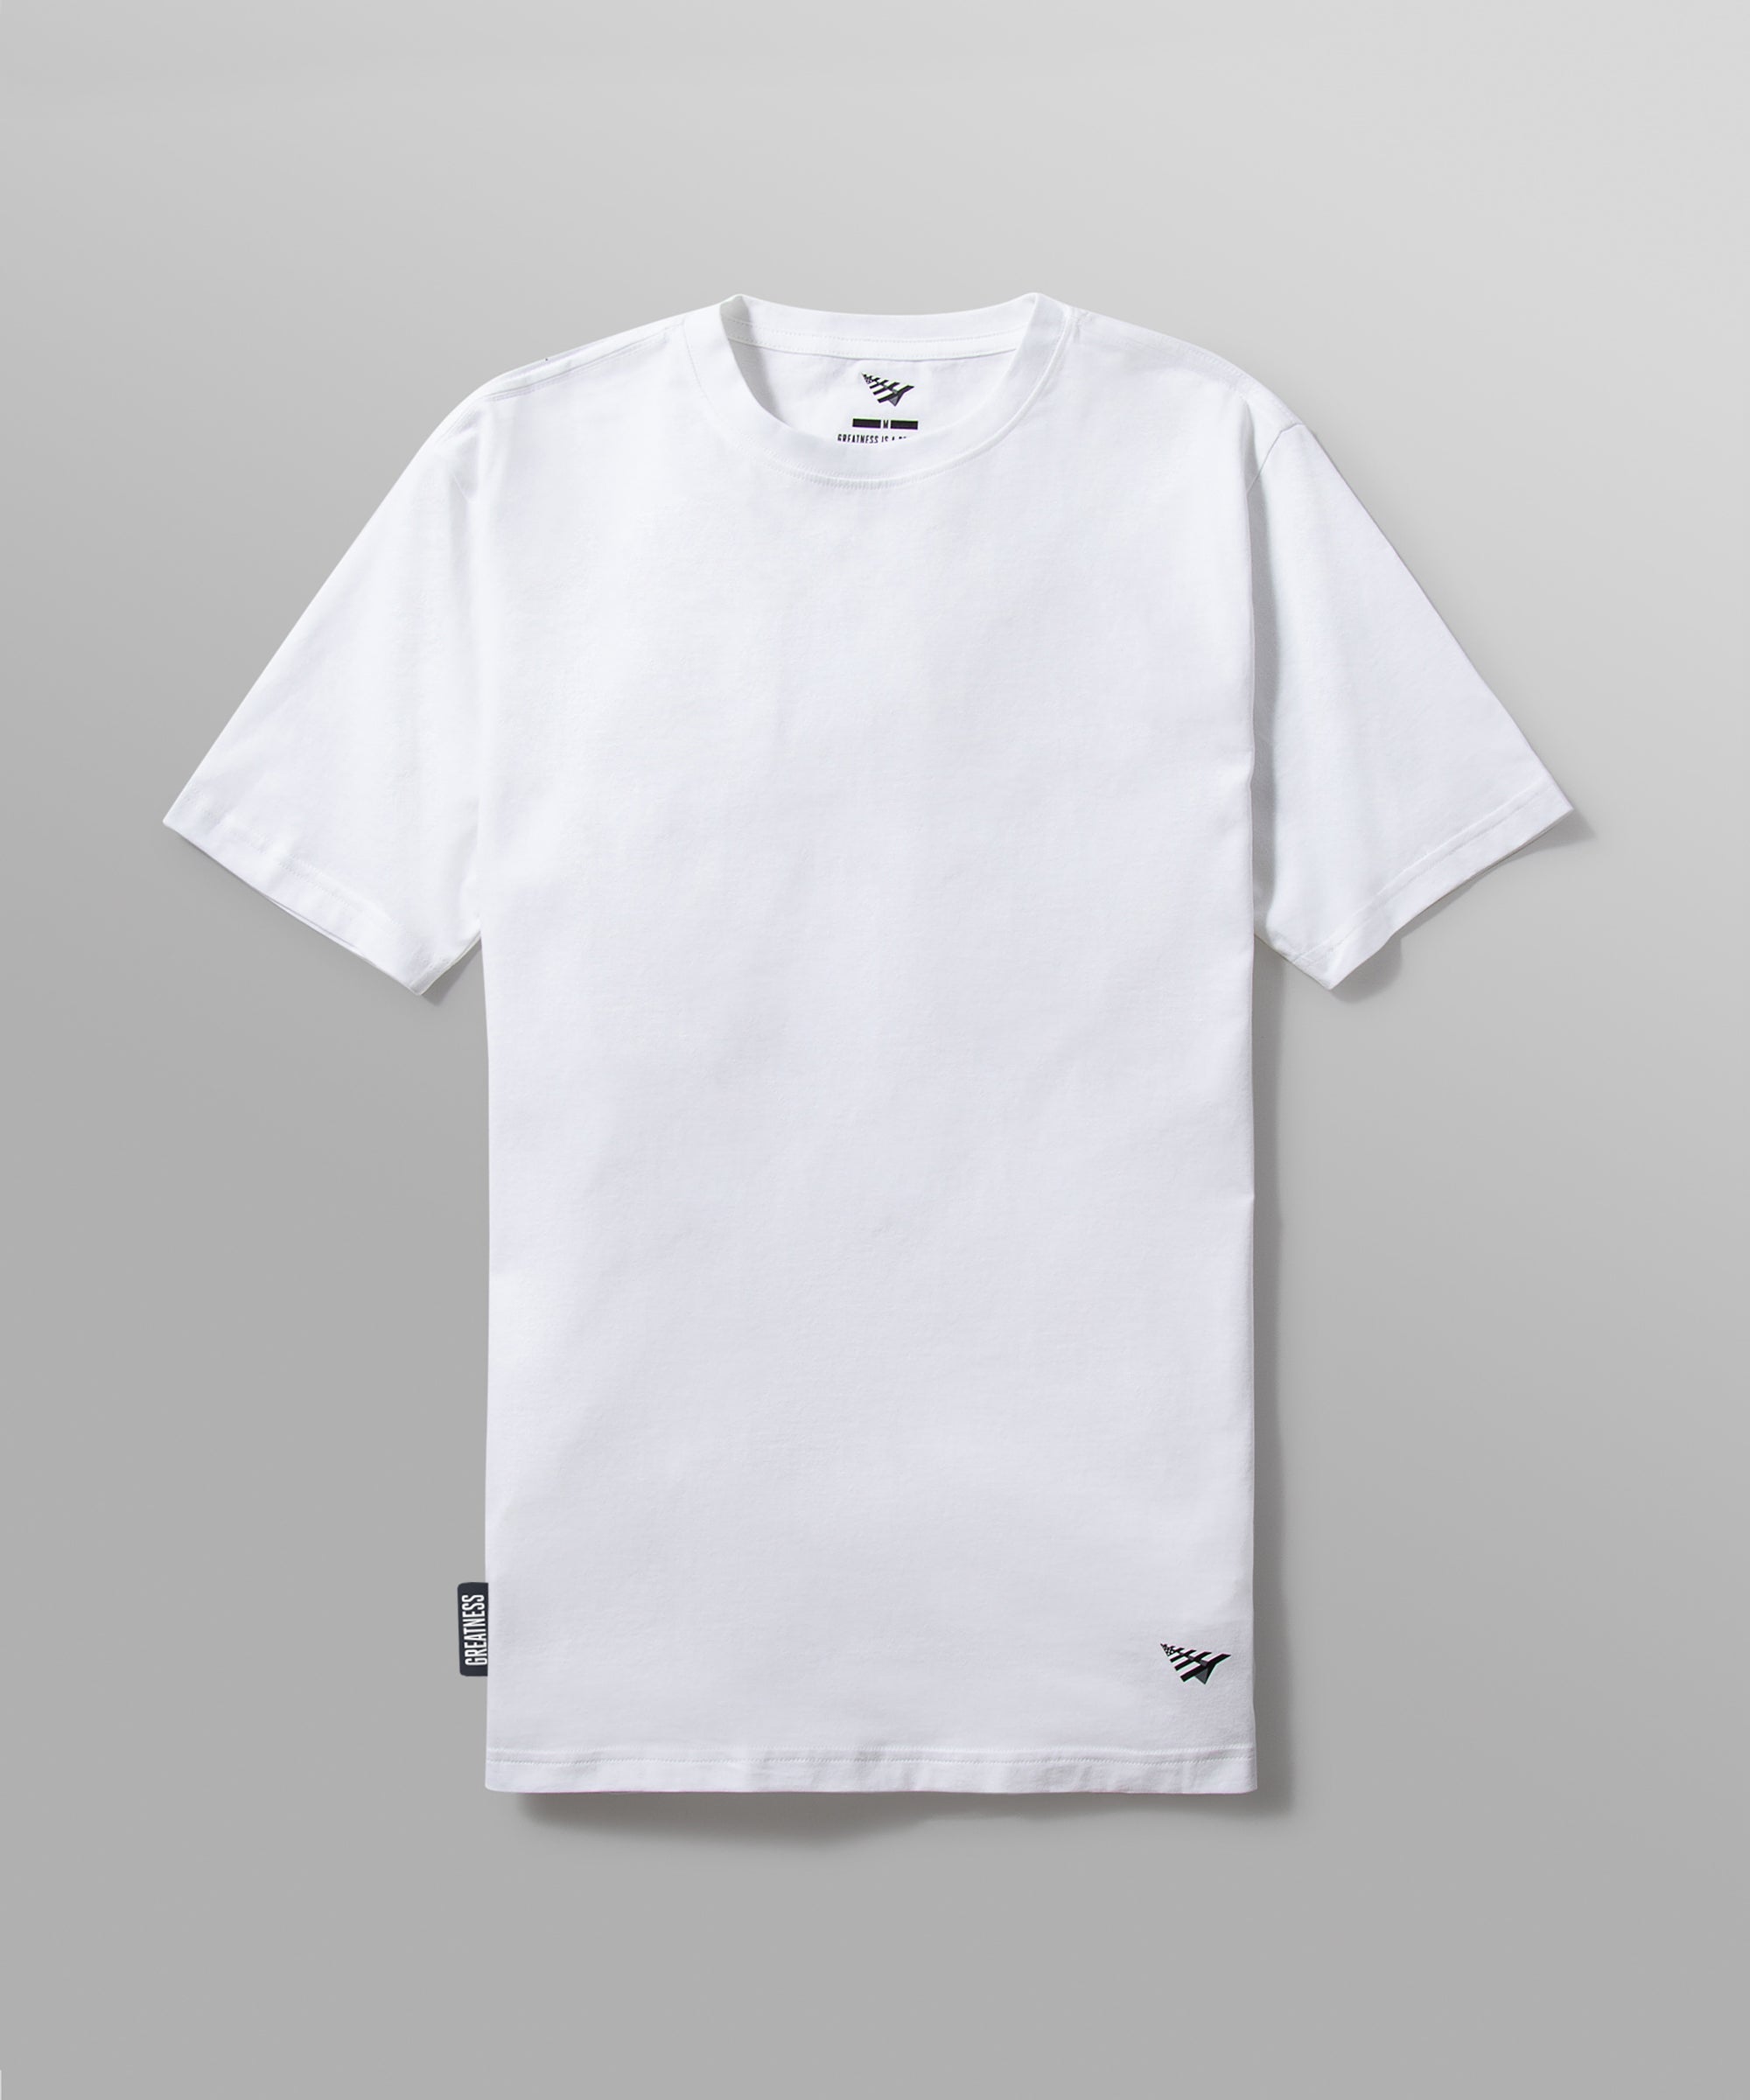 Paper Planes - THE PAINT TEE - White